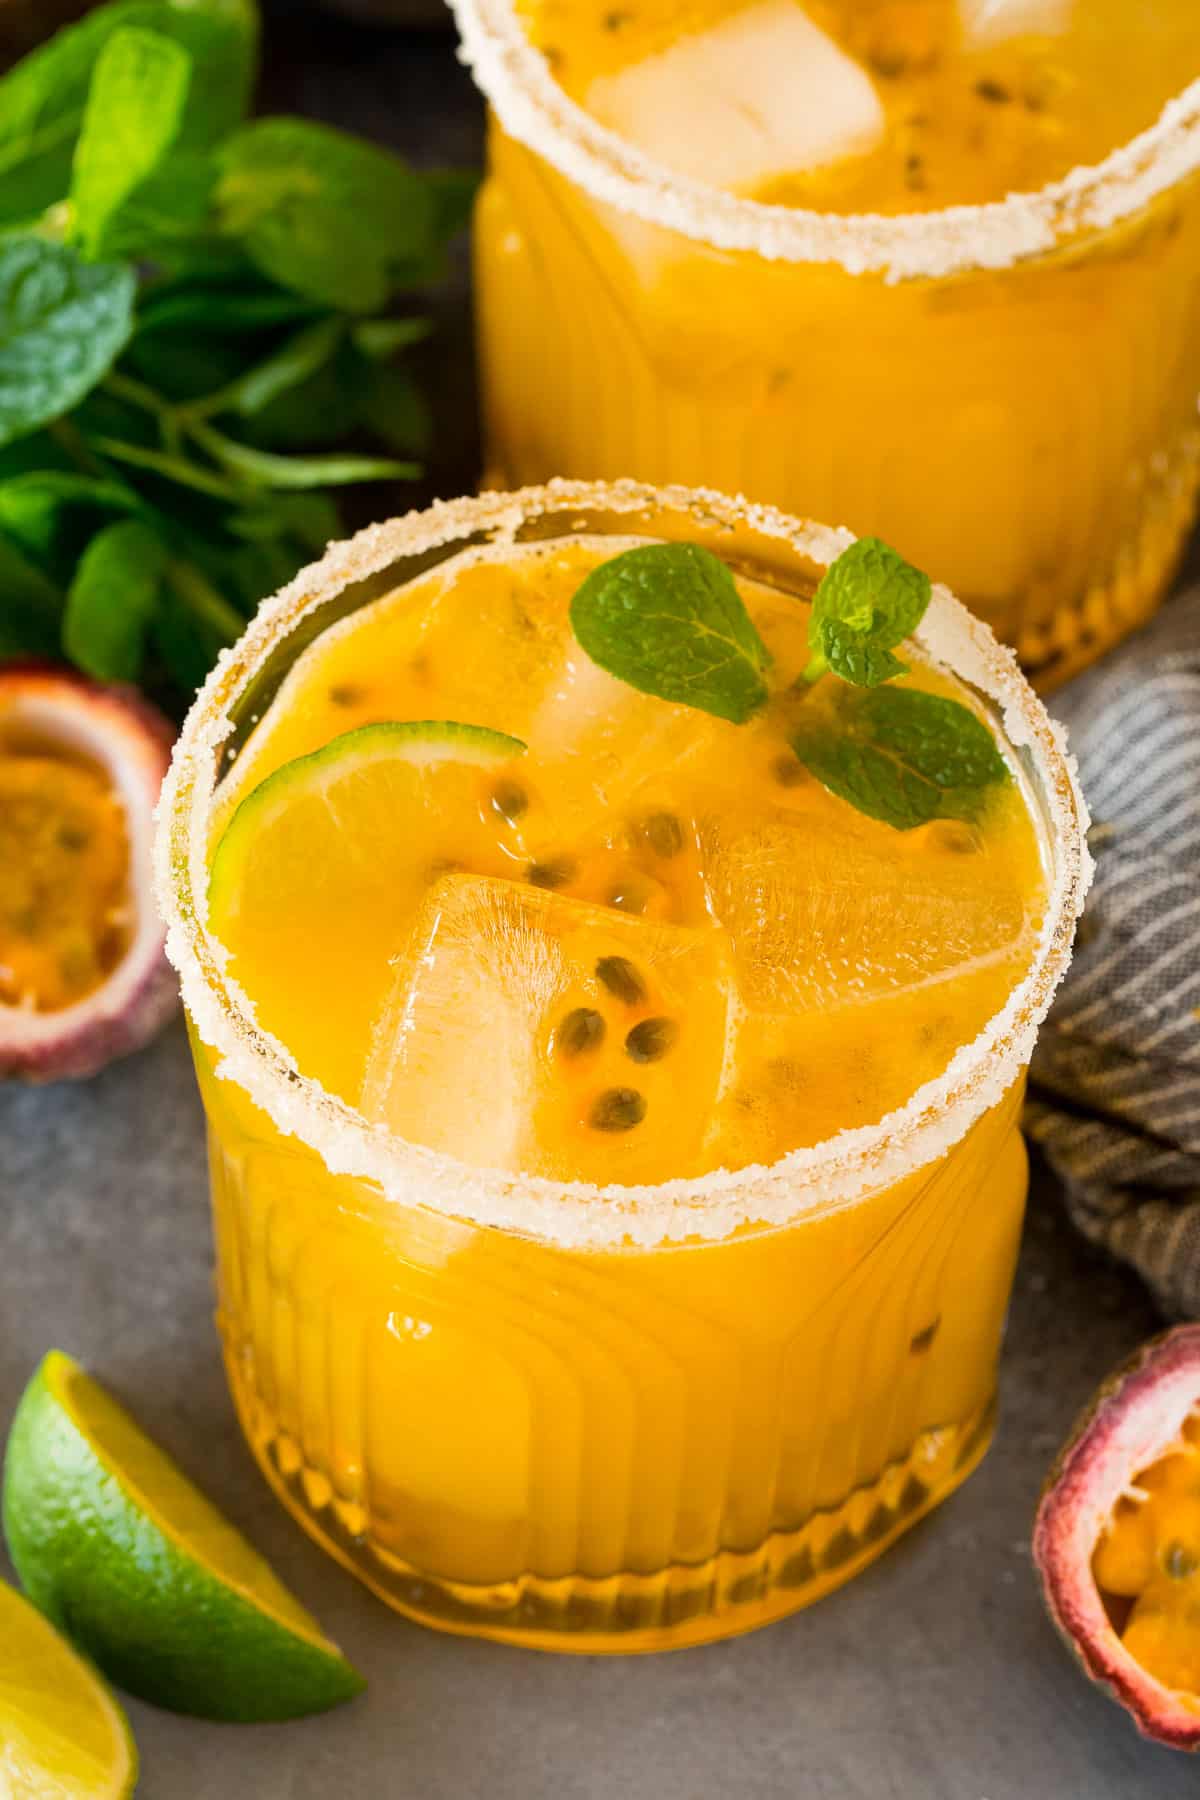 Two glasses of passion fruit margarita with sugared rims and mint for garnish.